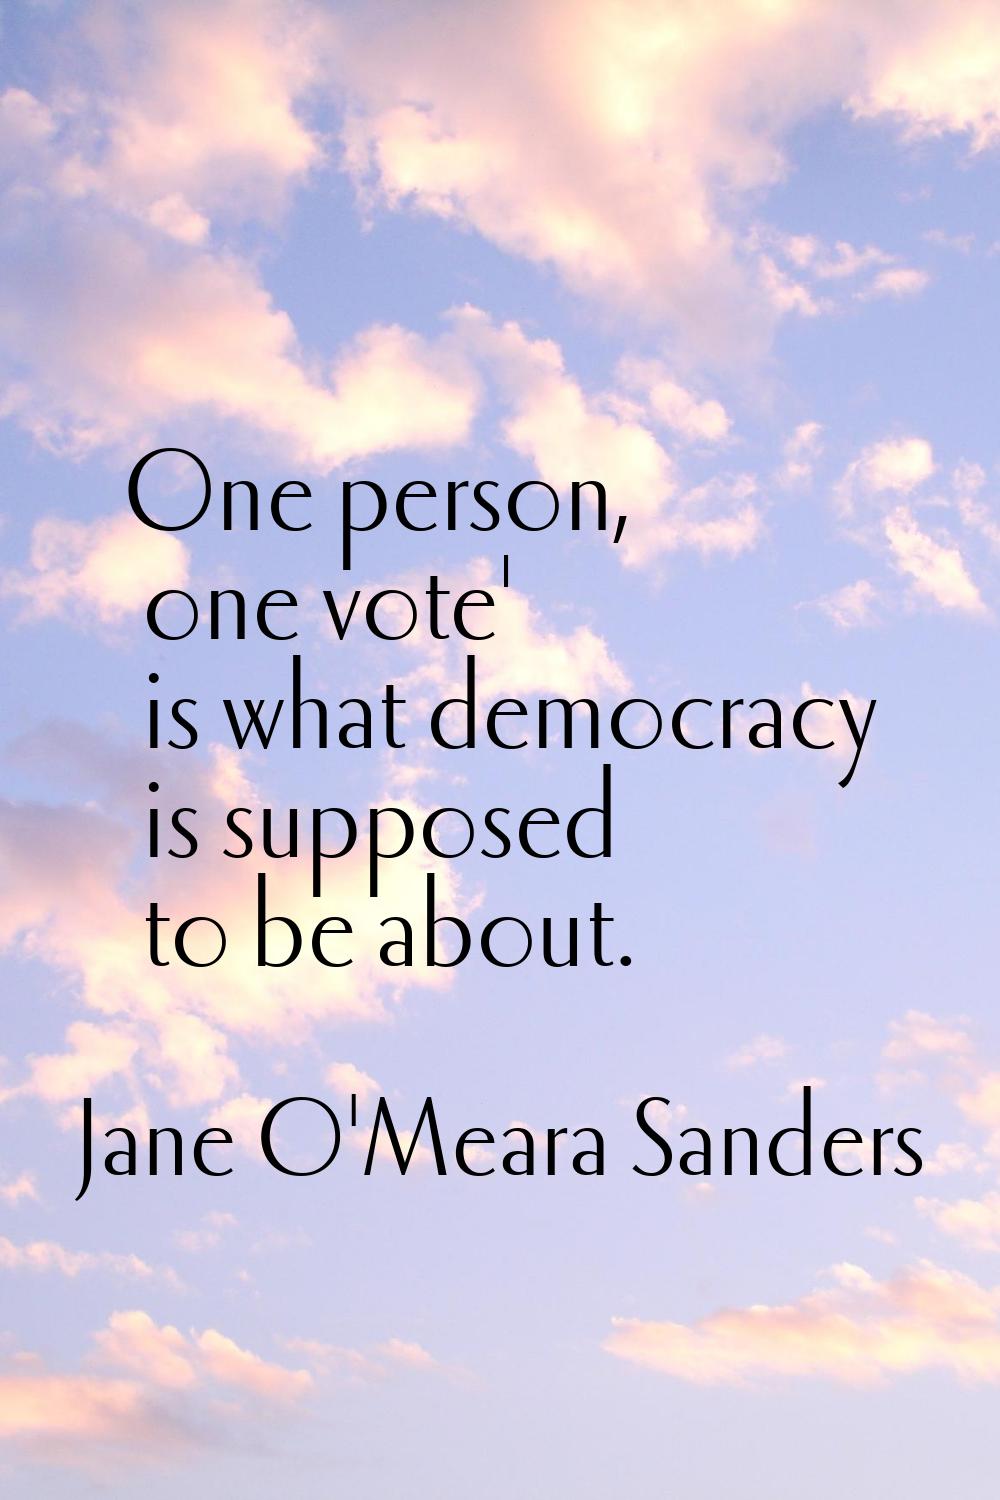 One person, one vote' is what democracy is supposed to be about.